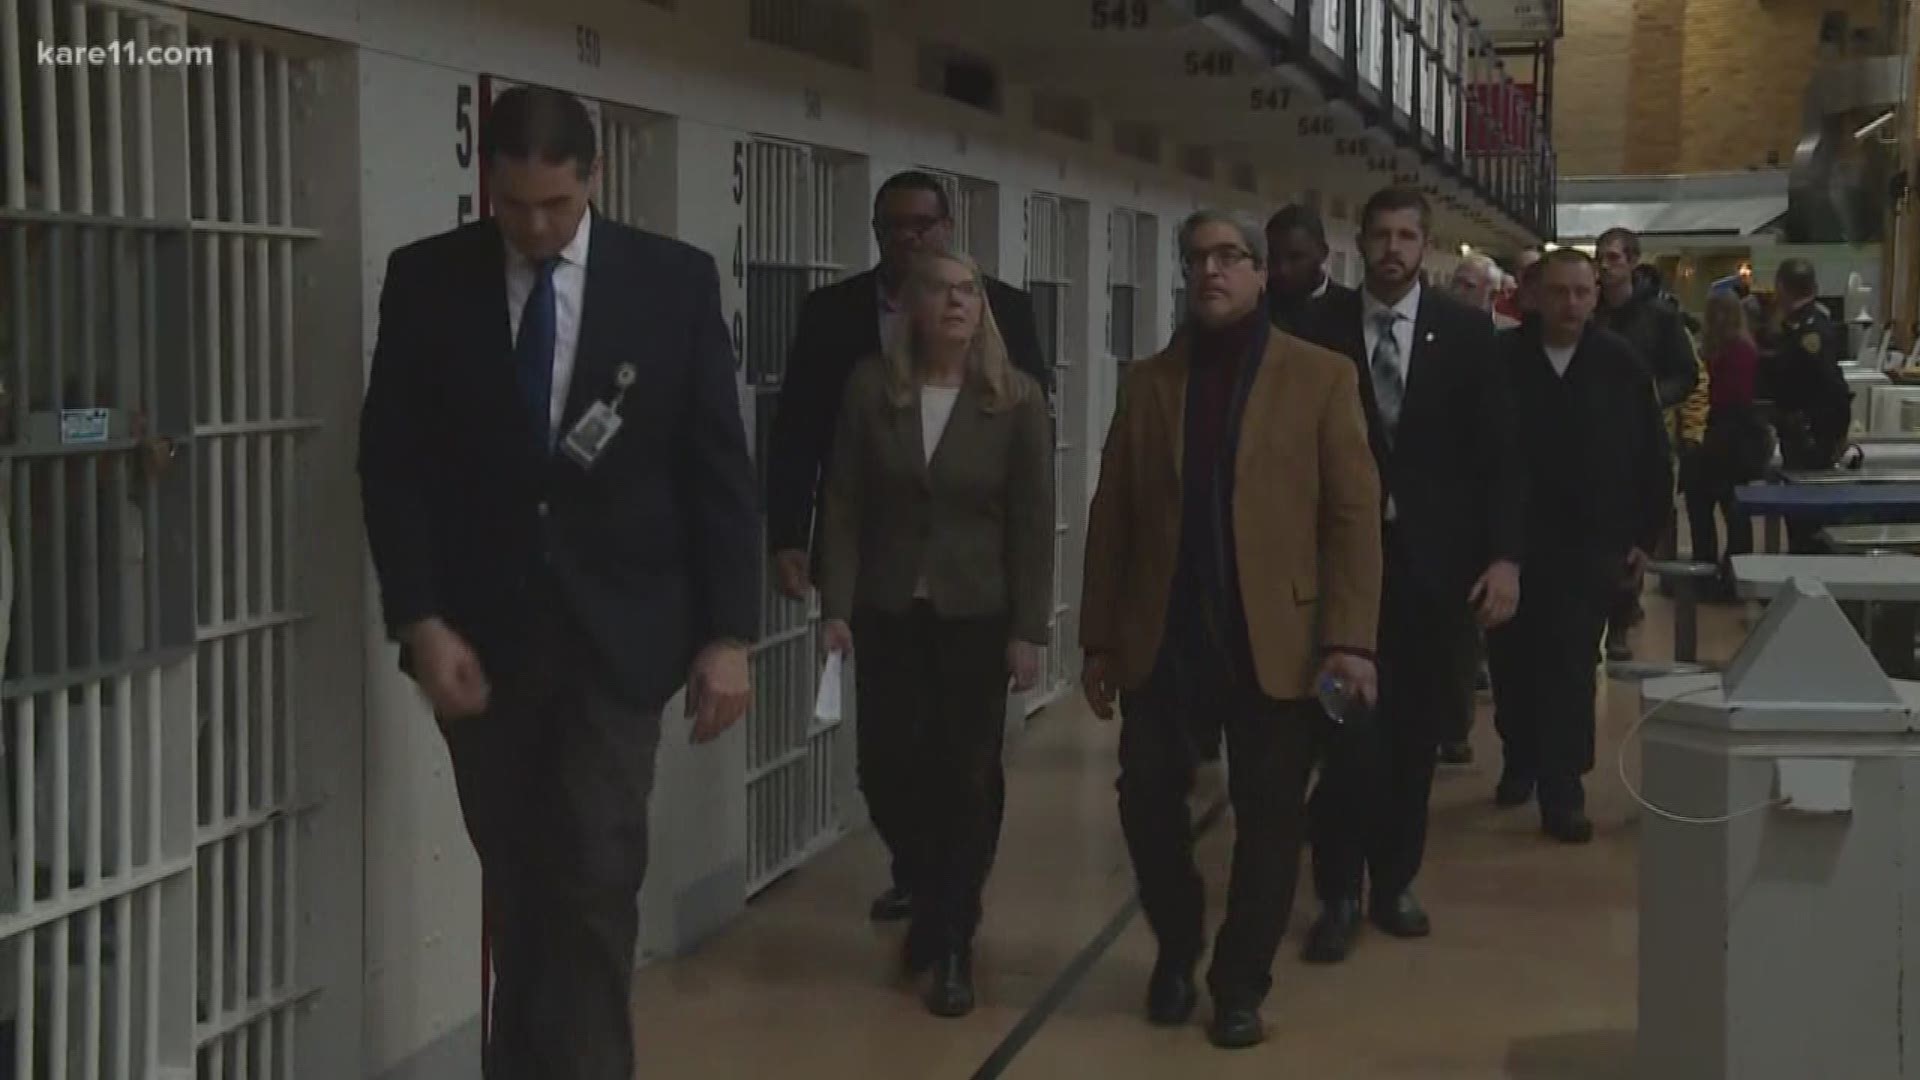 A firsthand look at conditions inside the Stillwater Prison. Lawmakers looking to improve safety for guards and inmates.